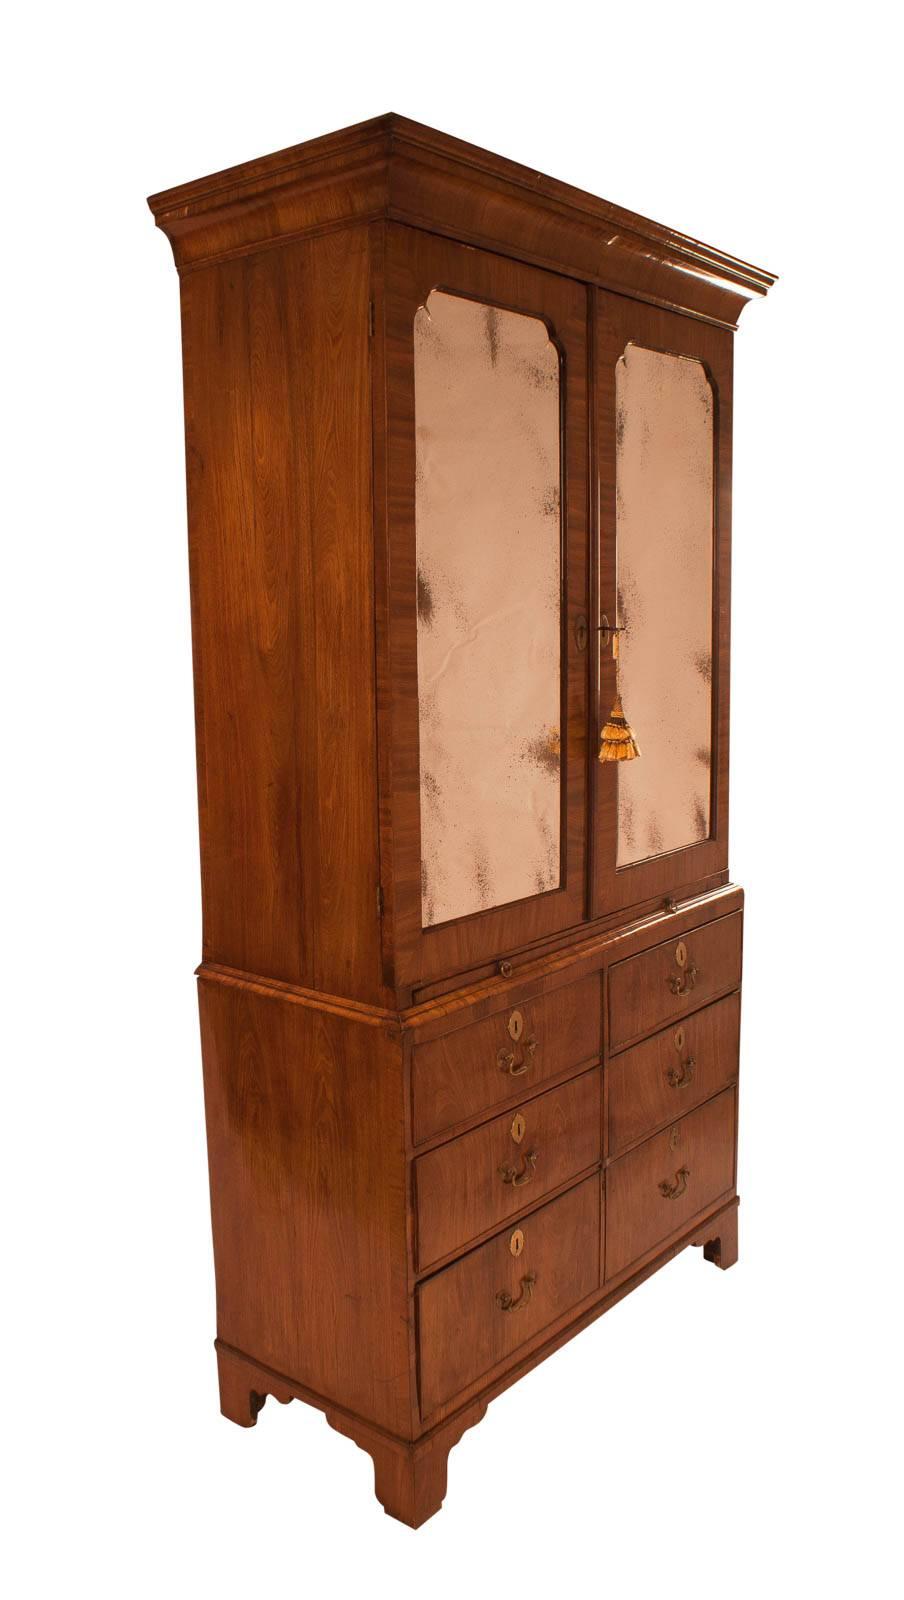 A good walnut linen press England circa 1730 mirrored doors over drawers with a brushing slide. Good color proportion and patina. From an old East Coast collection. Original mirror plates re-silvered. Useful and beautiful.